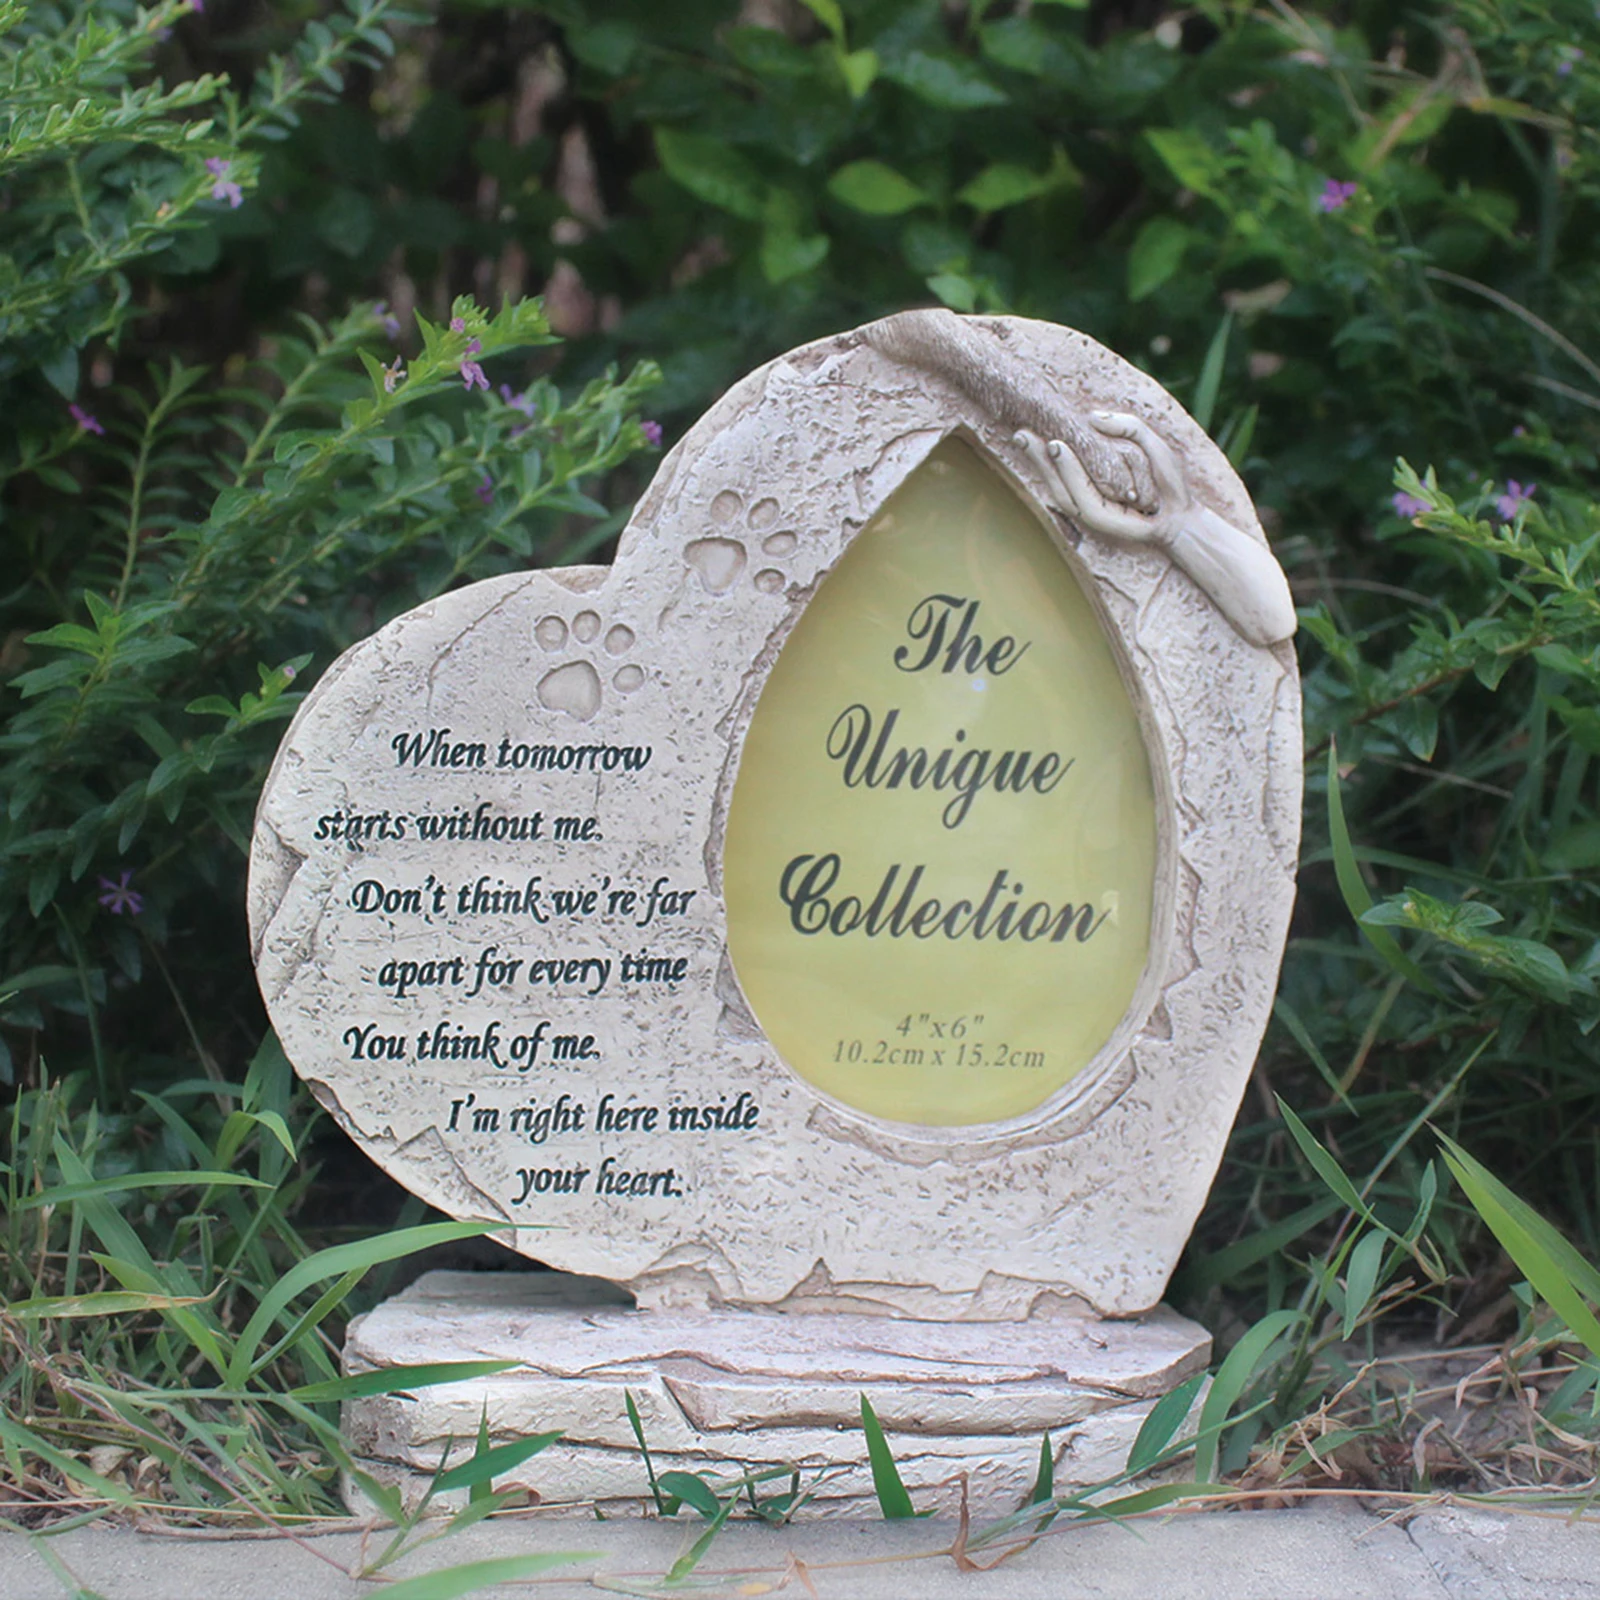 Pet Memorial Stone Heart Shaped Tombstone Cat Puppy with Yard Ornaments